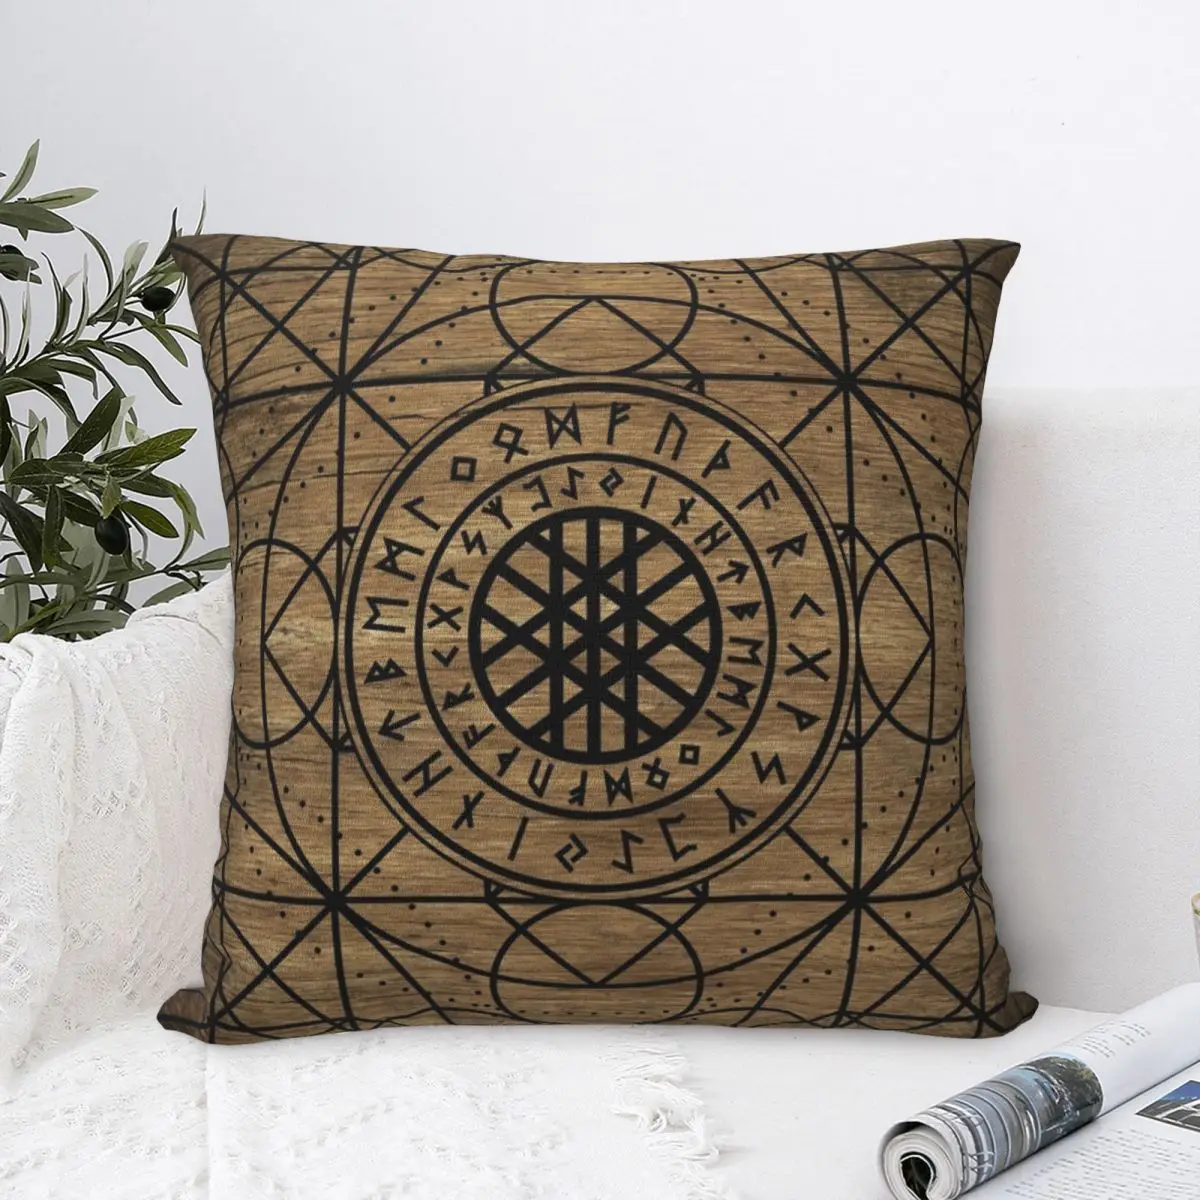 Web Of Wyrd -The Matrix Of Fate Square Pillowcase Cushion Cover Comfort Pillow Case Polyester Throw Pillow cover For Bedroom Car